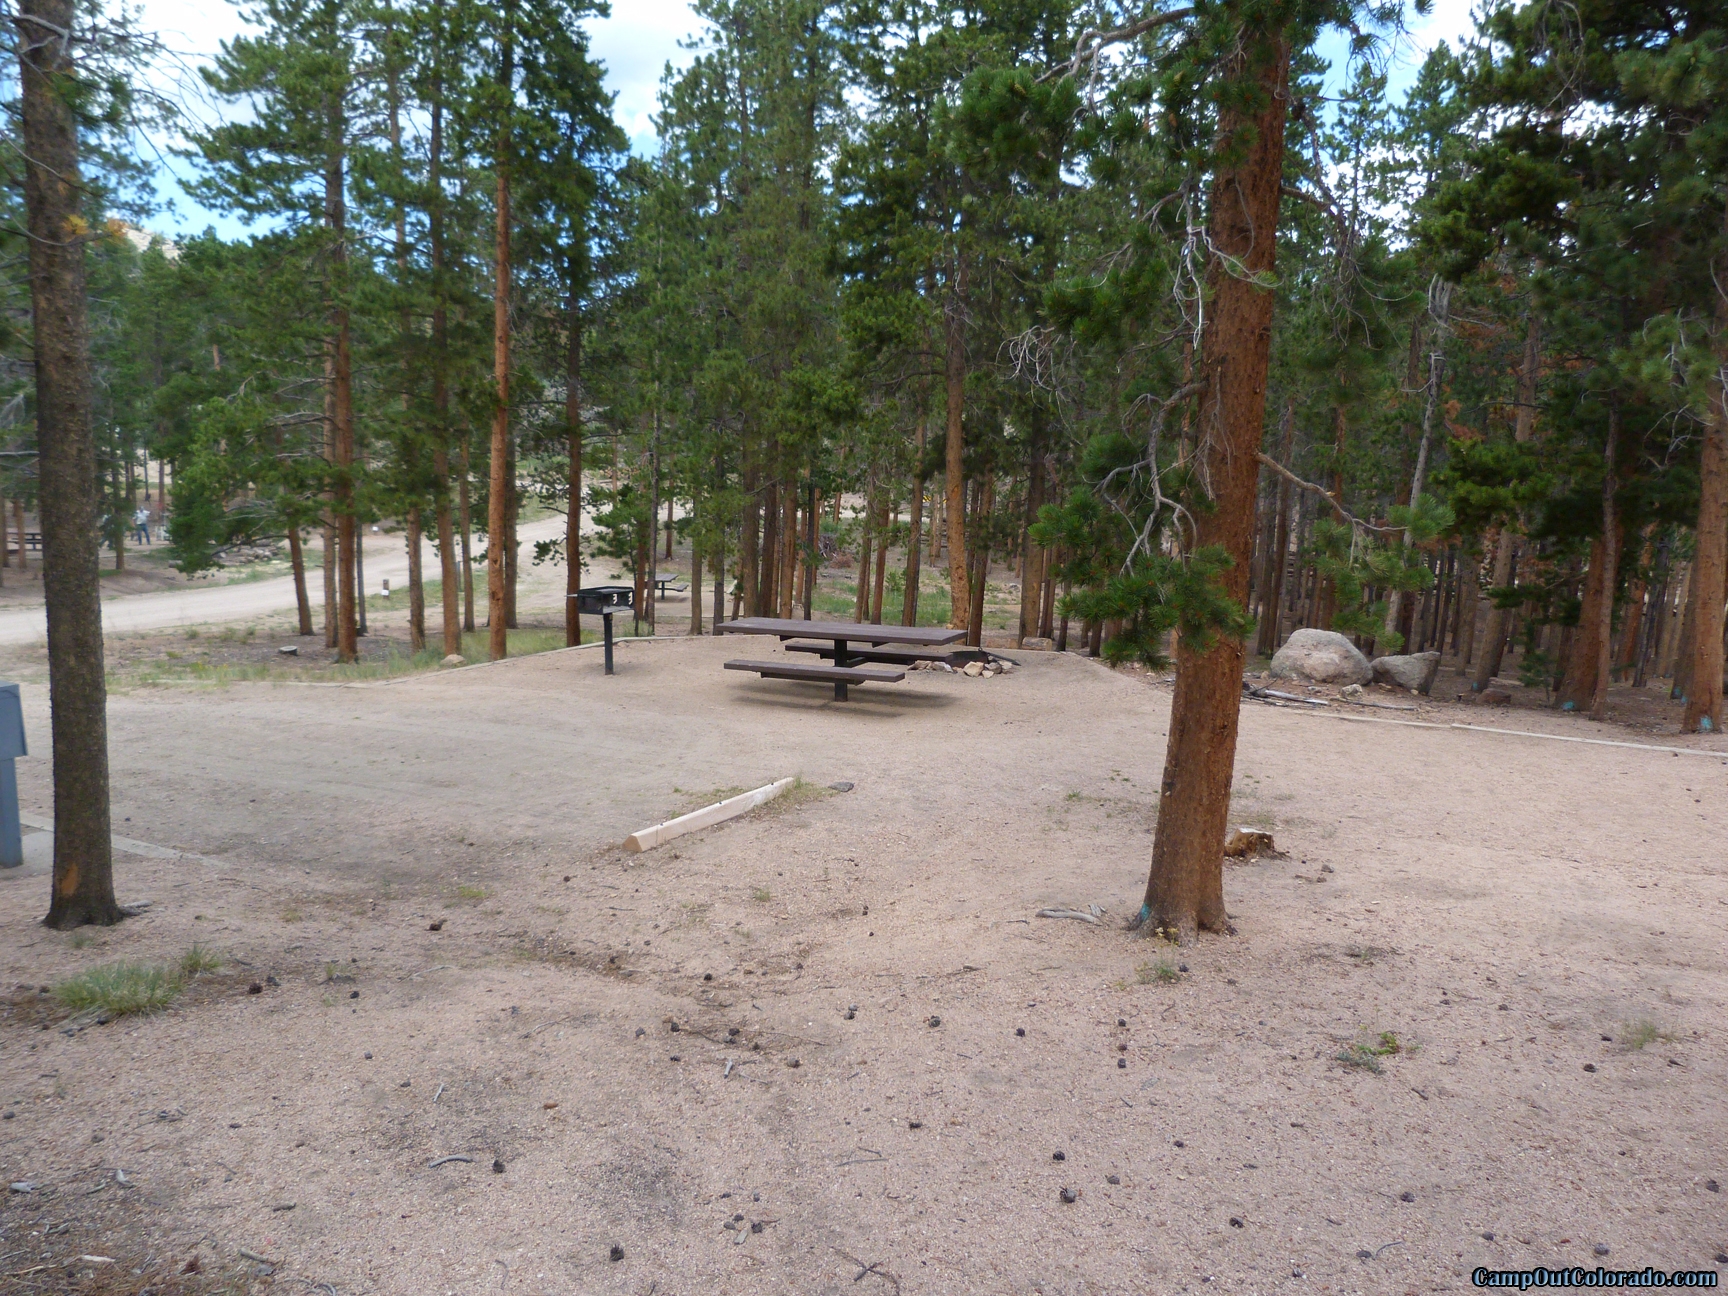 Camping Review of Bellaire Lake Campground - Good Campsite Spacing